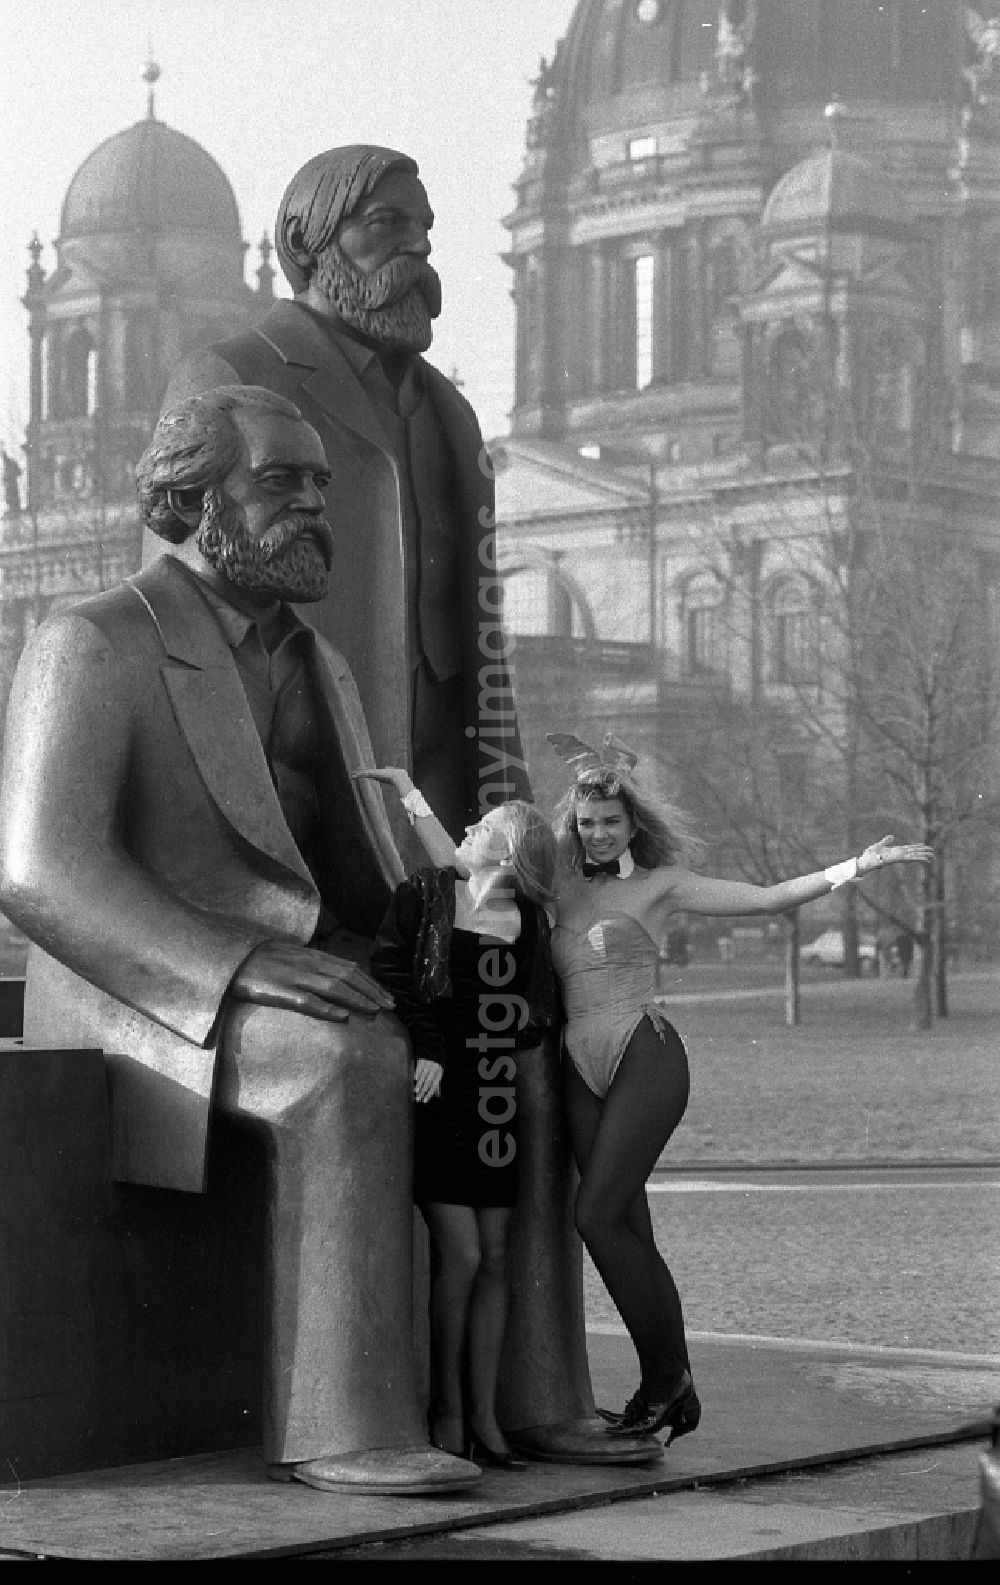 GDR image archive: Berlin - As a young woman, Anja Kossak presents the latest women's fashion collection at a Playmate photo shoot in front of the statue of the Marx-Engels-Forum on Karl-Liebknecht-Strasse in the Mitte district of East Berlin in the area of the former GDR, German Democratic Republic